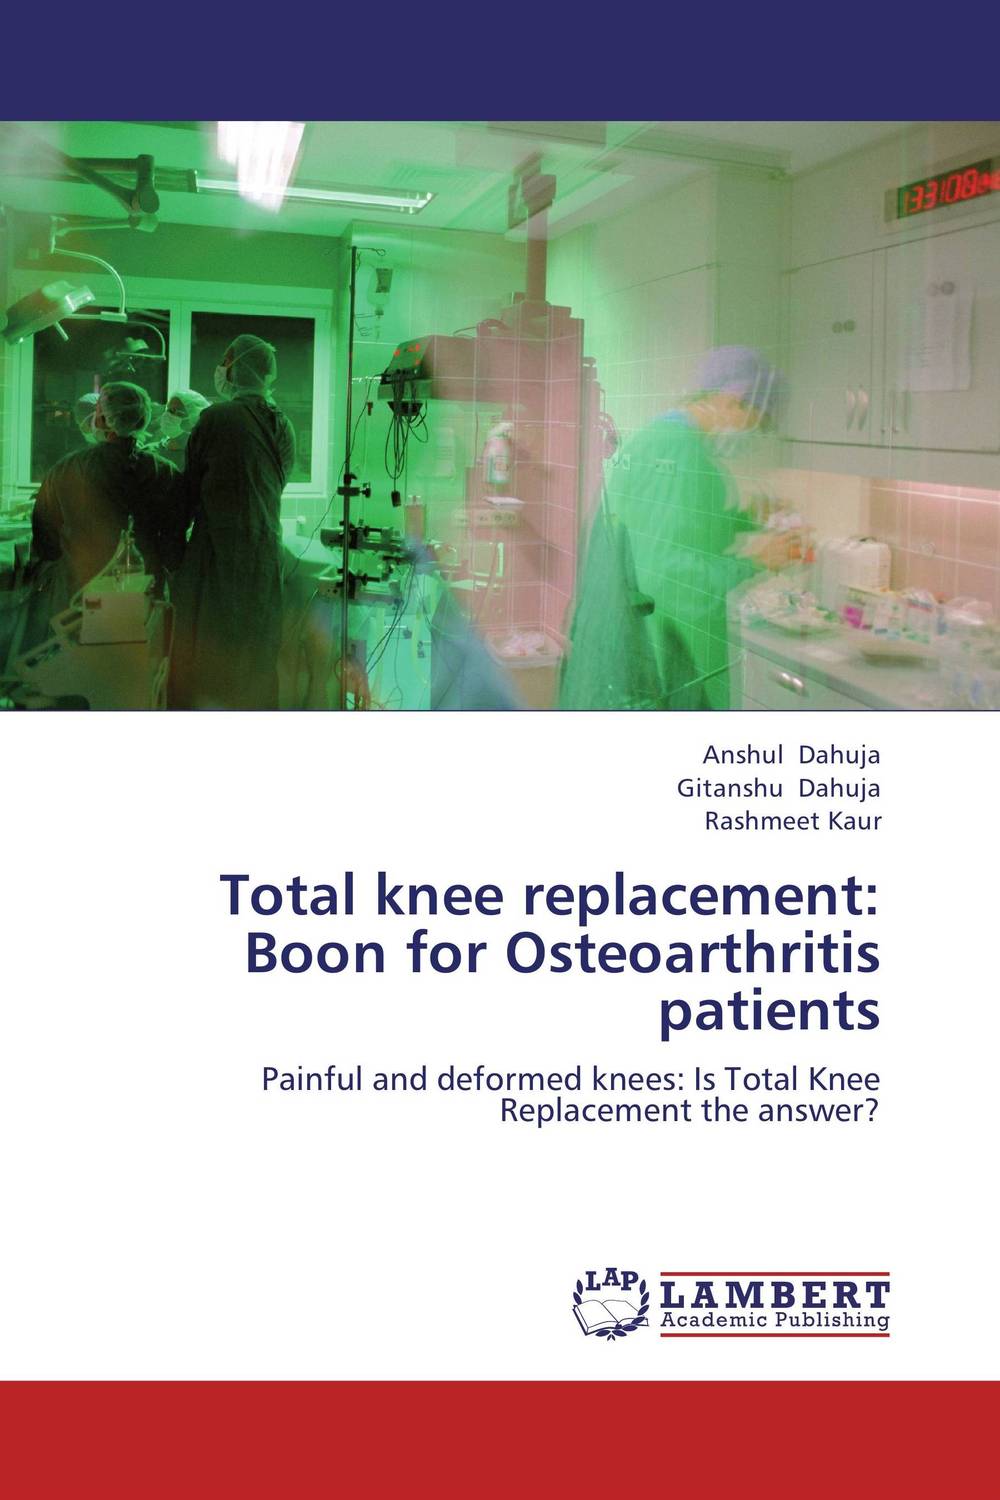 Total knee replacement: Boon for Osteoarthritis patients